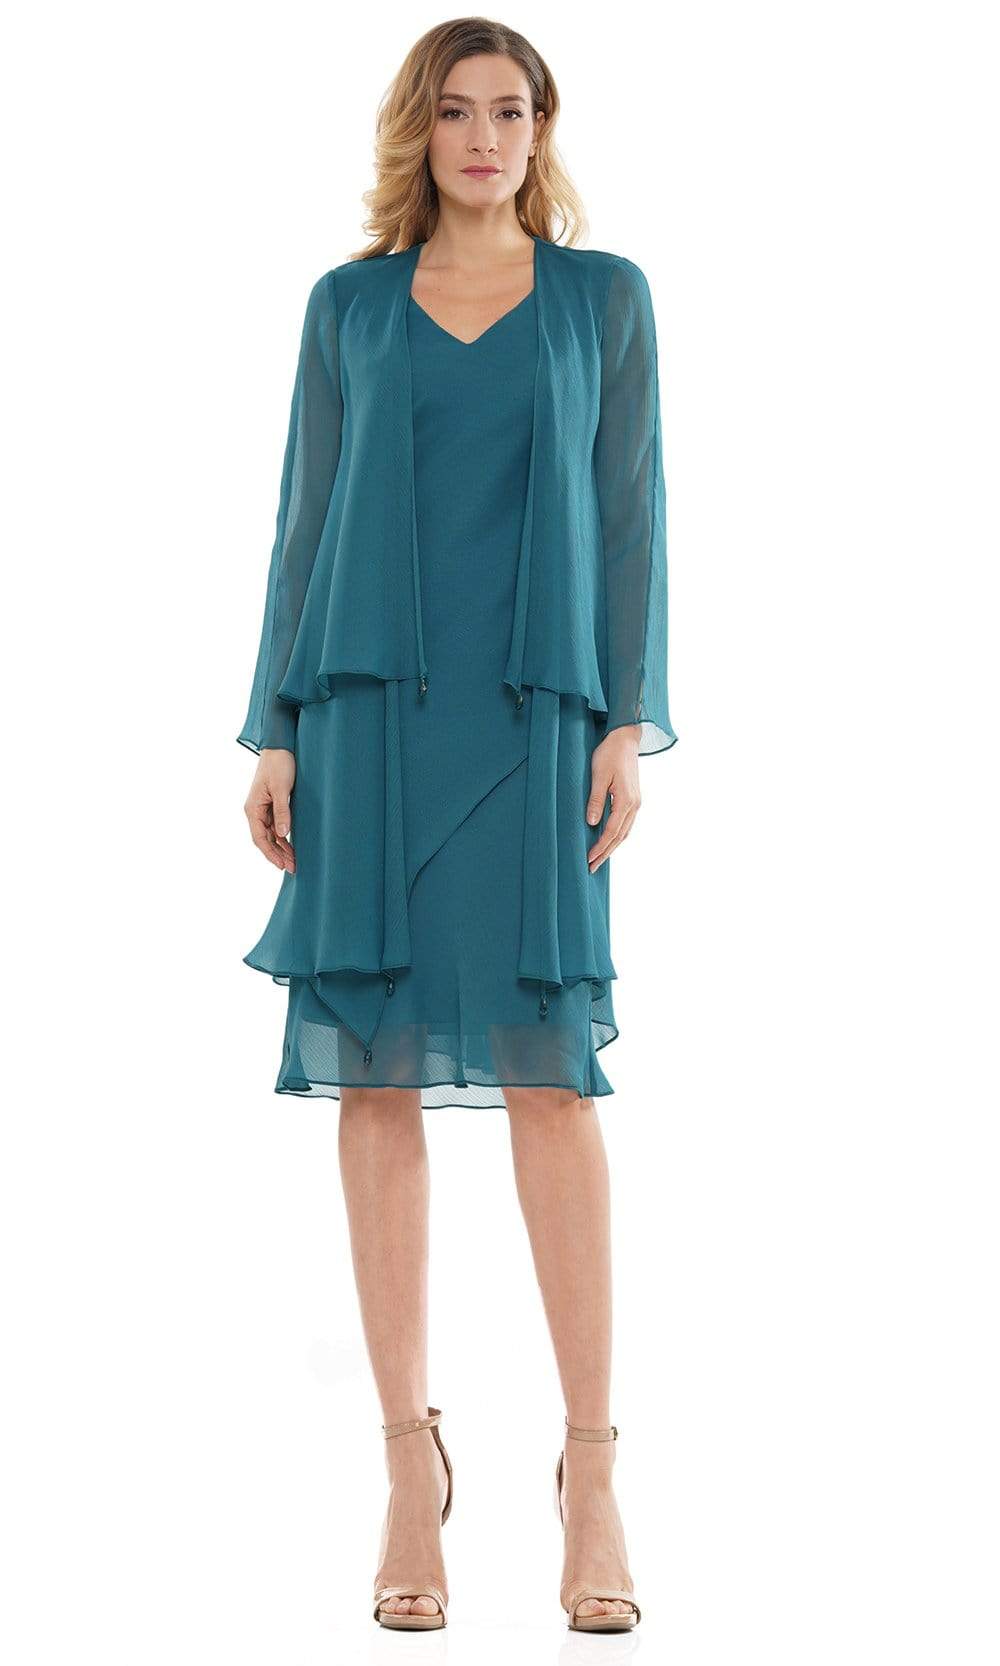 Marsoni by Colors - M307 V-Neck Sheath Knee-Length Dress Mother of the Bride Dresses 6 / Teal